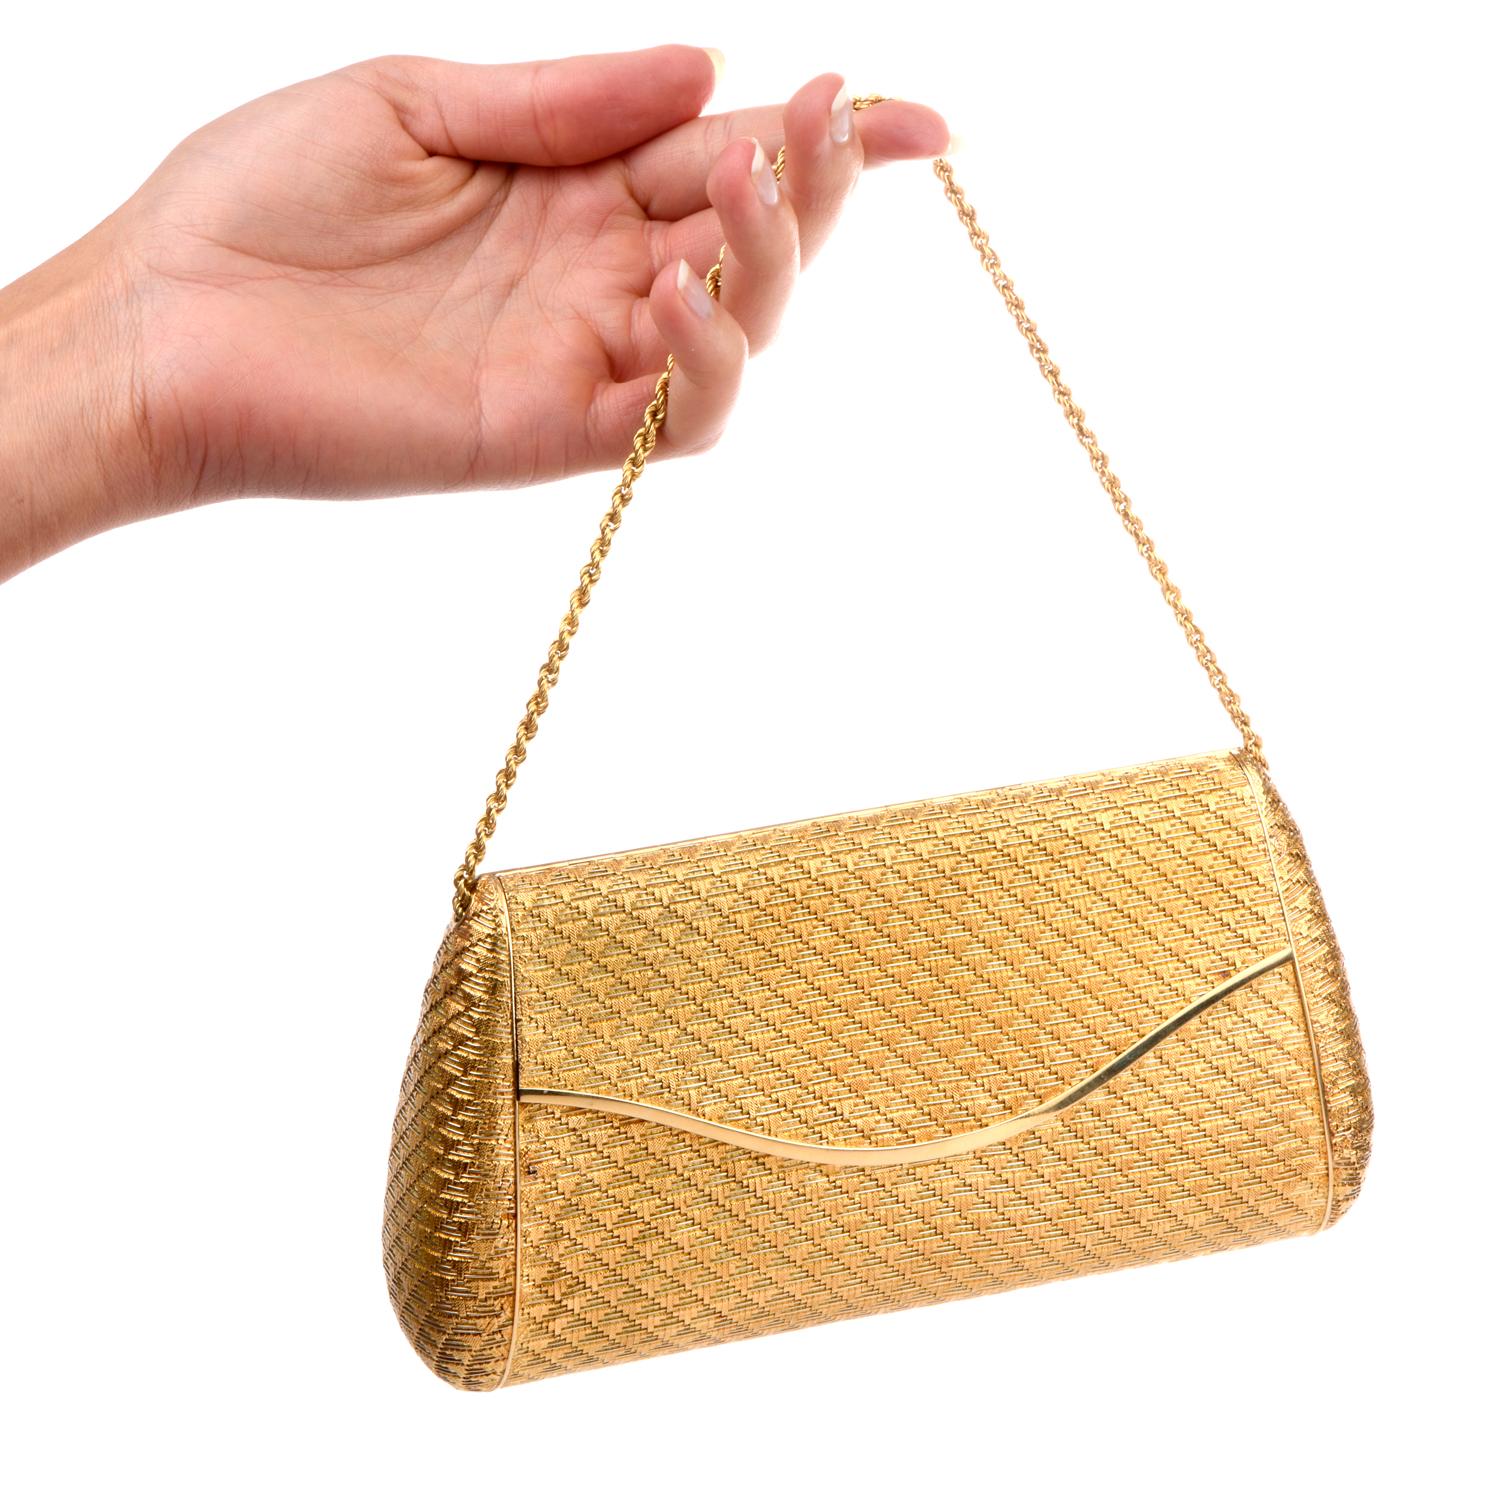 This exquisite Vintage Italian 1960's Clutch Purse was inspired with a soft textured 18k rope chain strap. Elegantly patterned with a hidden mirror in the interior and crafted in 408.6 grams of 18K yellow gold.  
Measures approximately 4in tall x